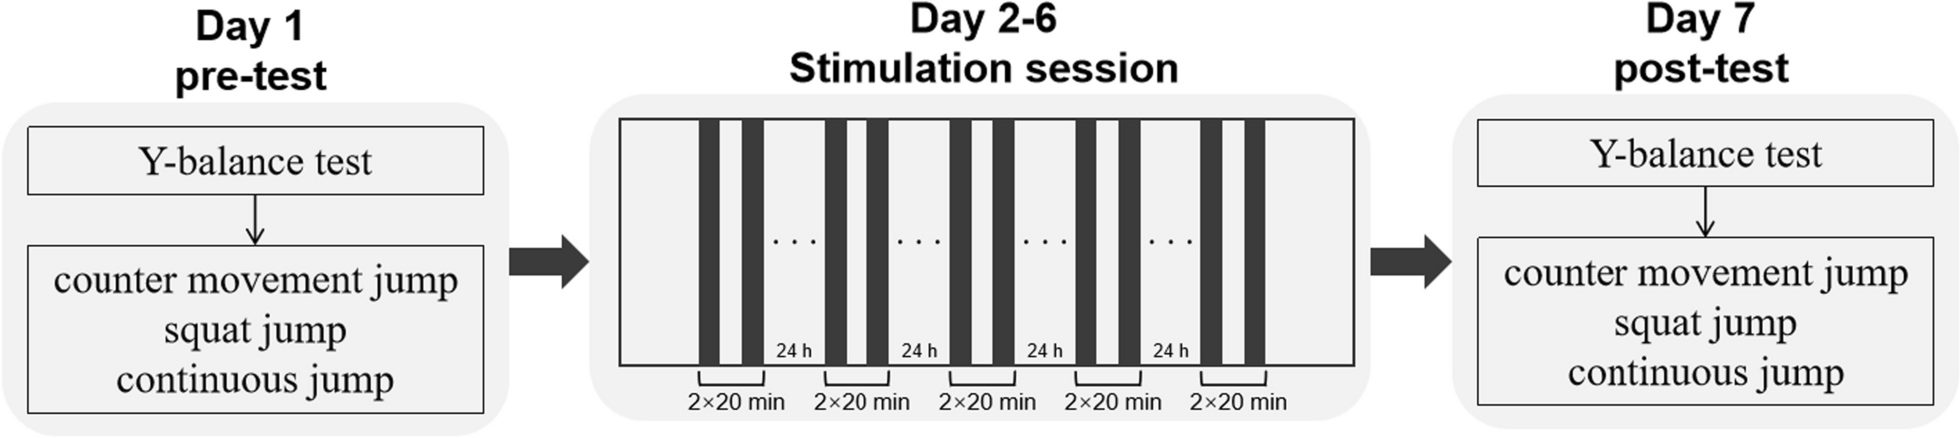 Repetitive temporal interference stimulation improves jump performance but not the postural stability in young healthy males: a randomized controlled trial